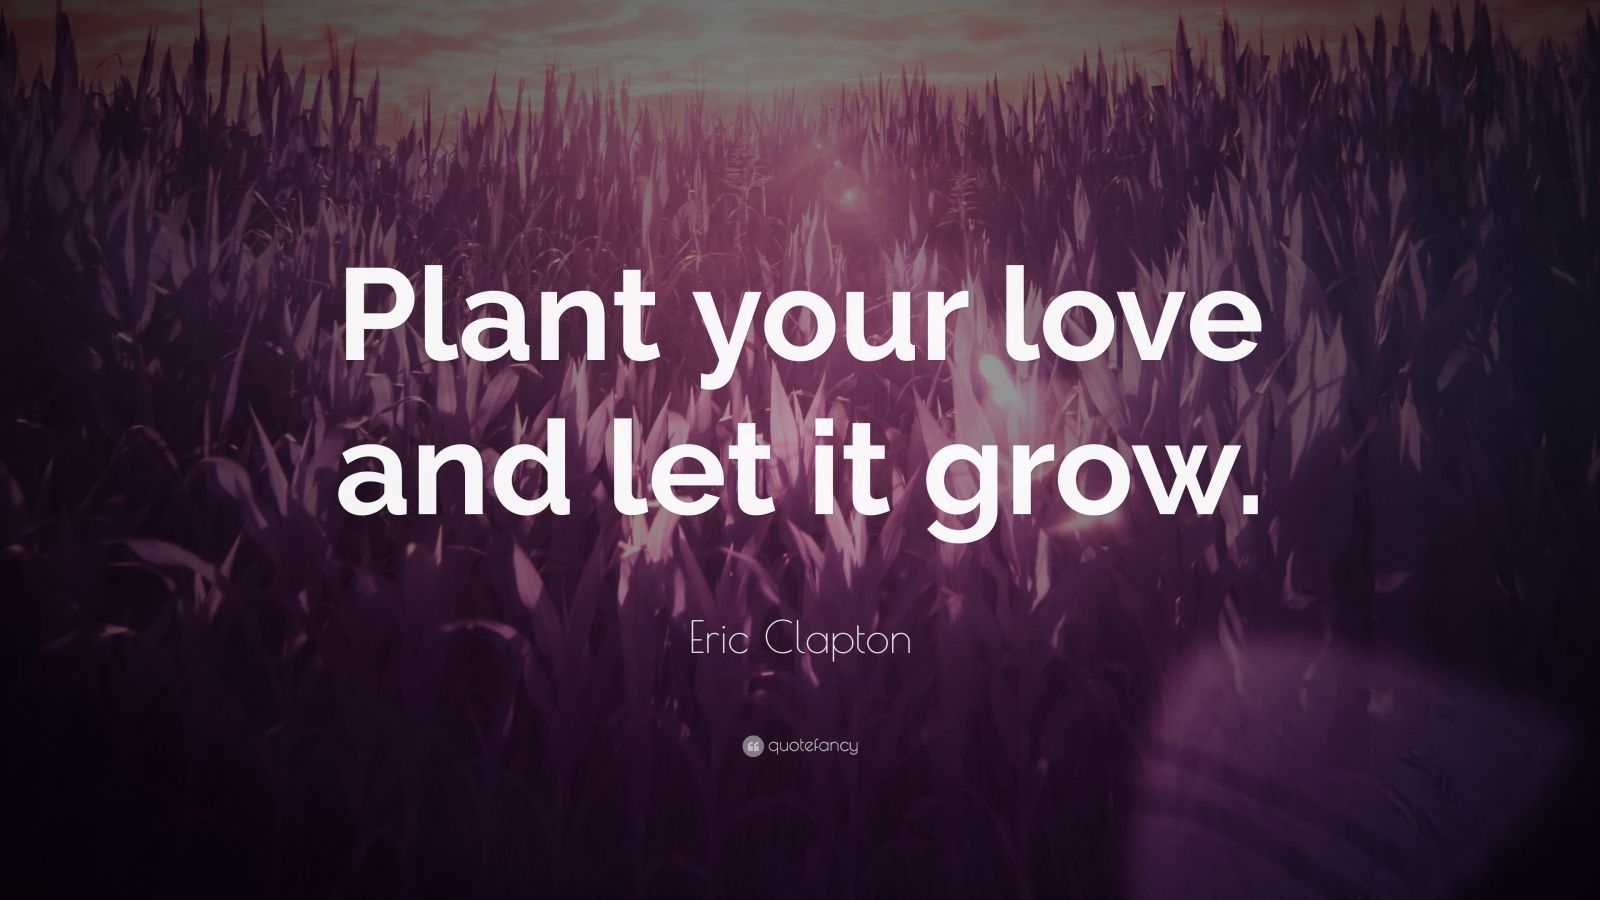 Eric Clapton Quote: "Plant your love and let it grow." (9 ...